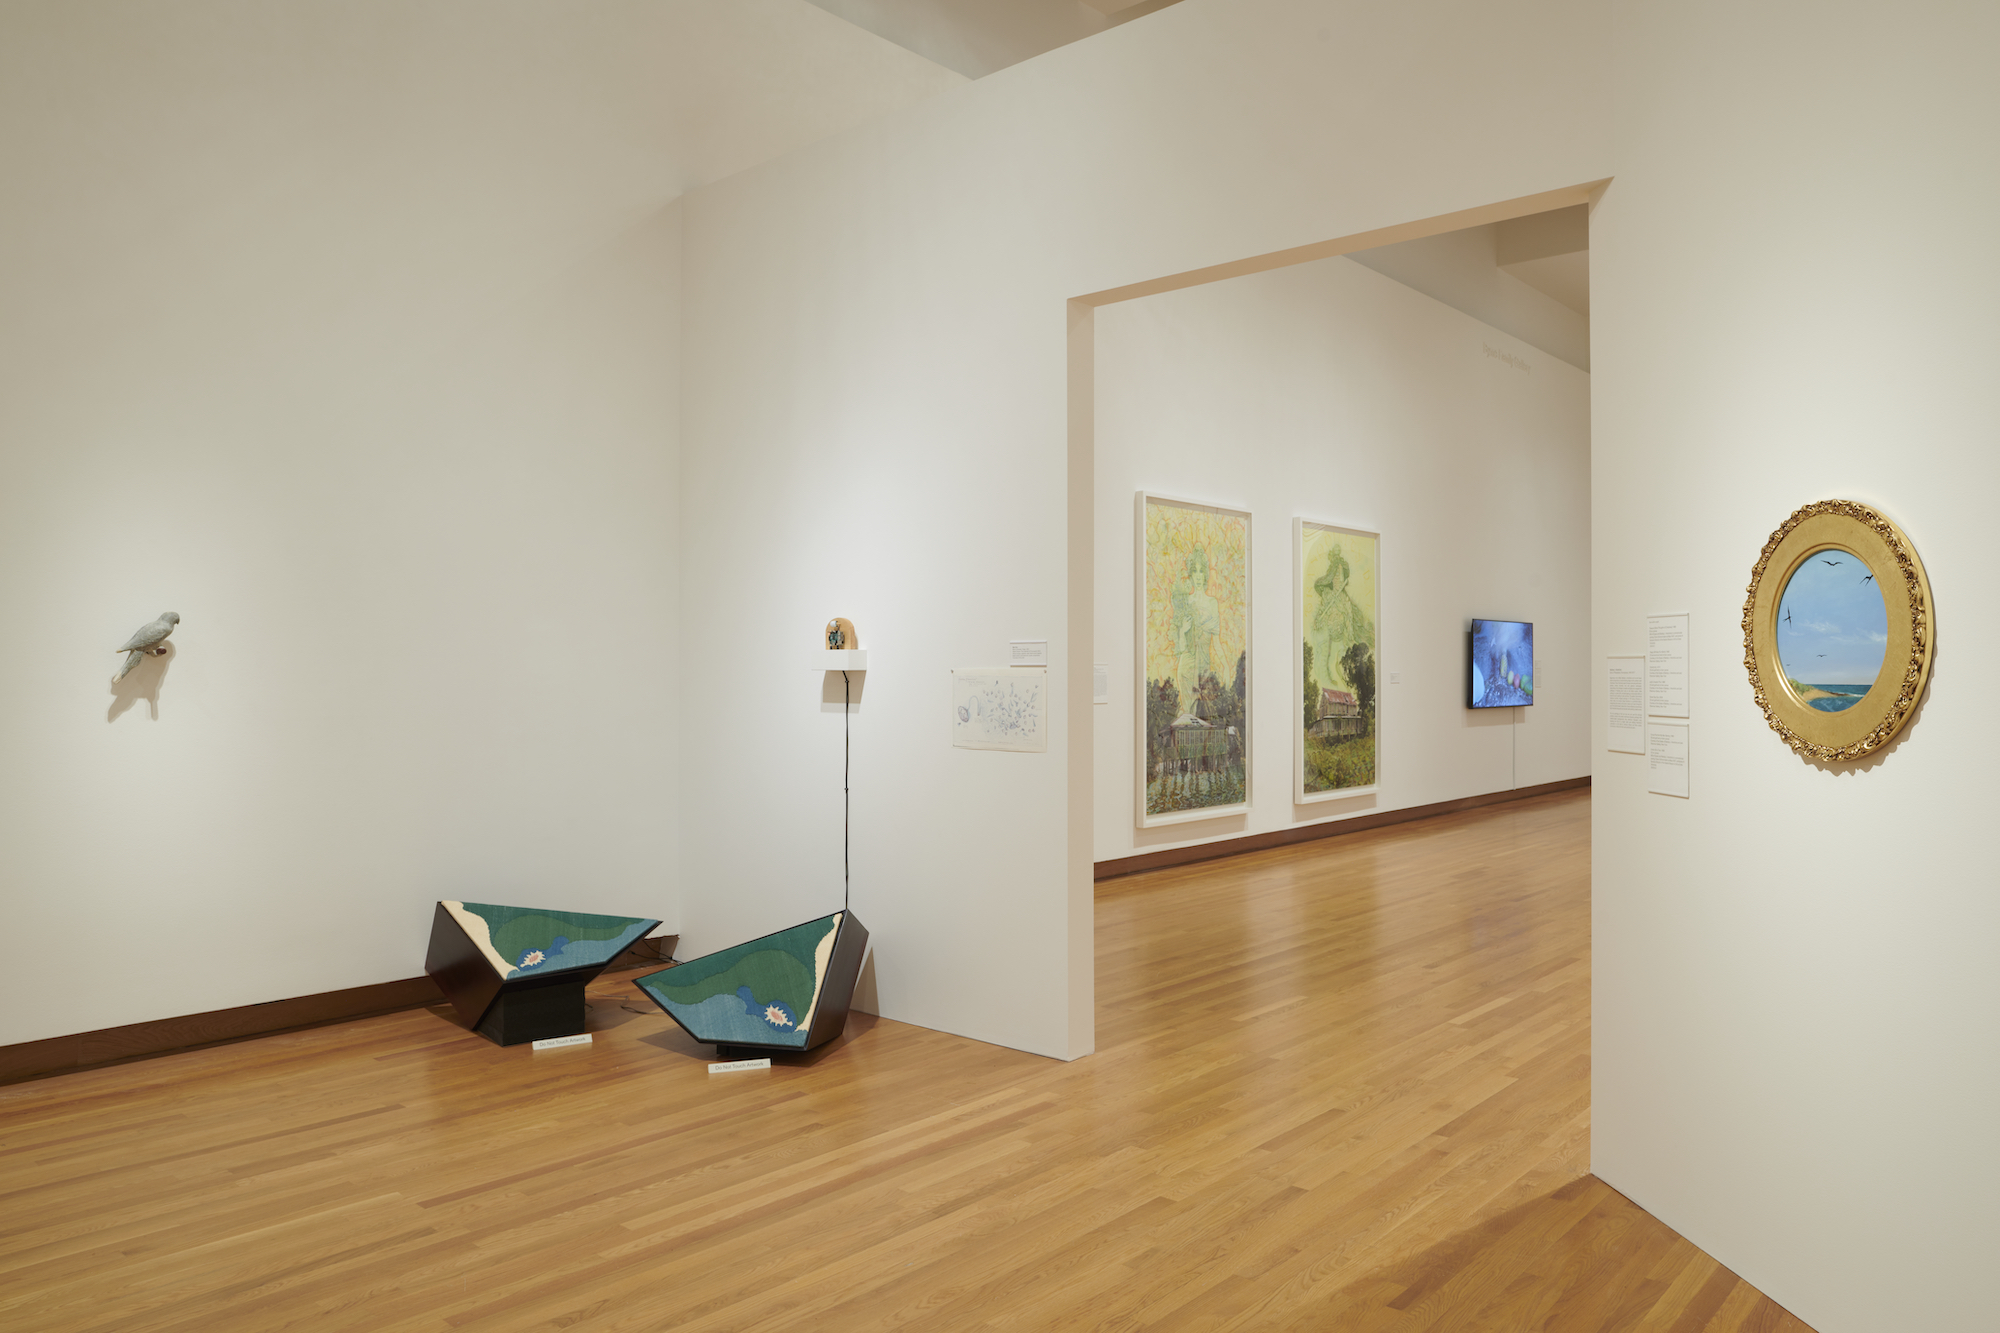 Installation view of Spirit in the Land, February 16 – July 09, 2023. Nasher Museum of Art at Duke University, Durham, North Carolina. Photo by Brian Quinby.